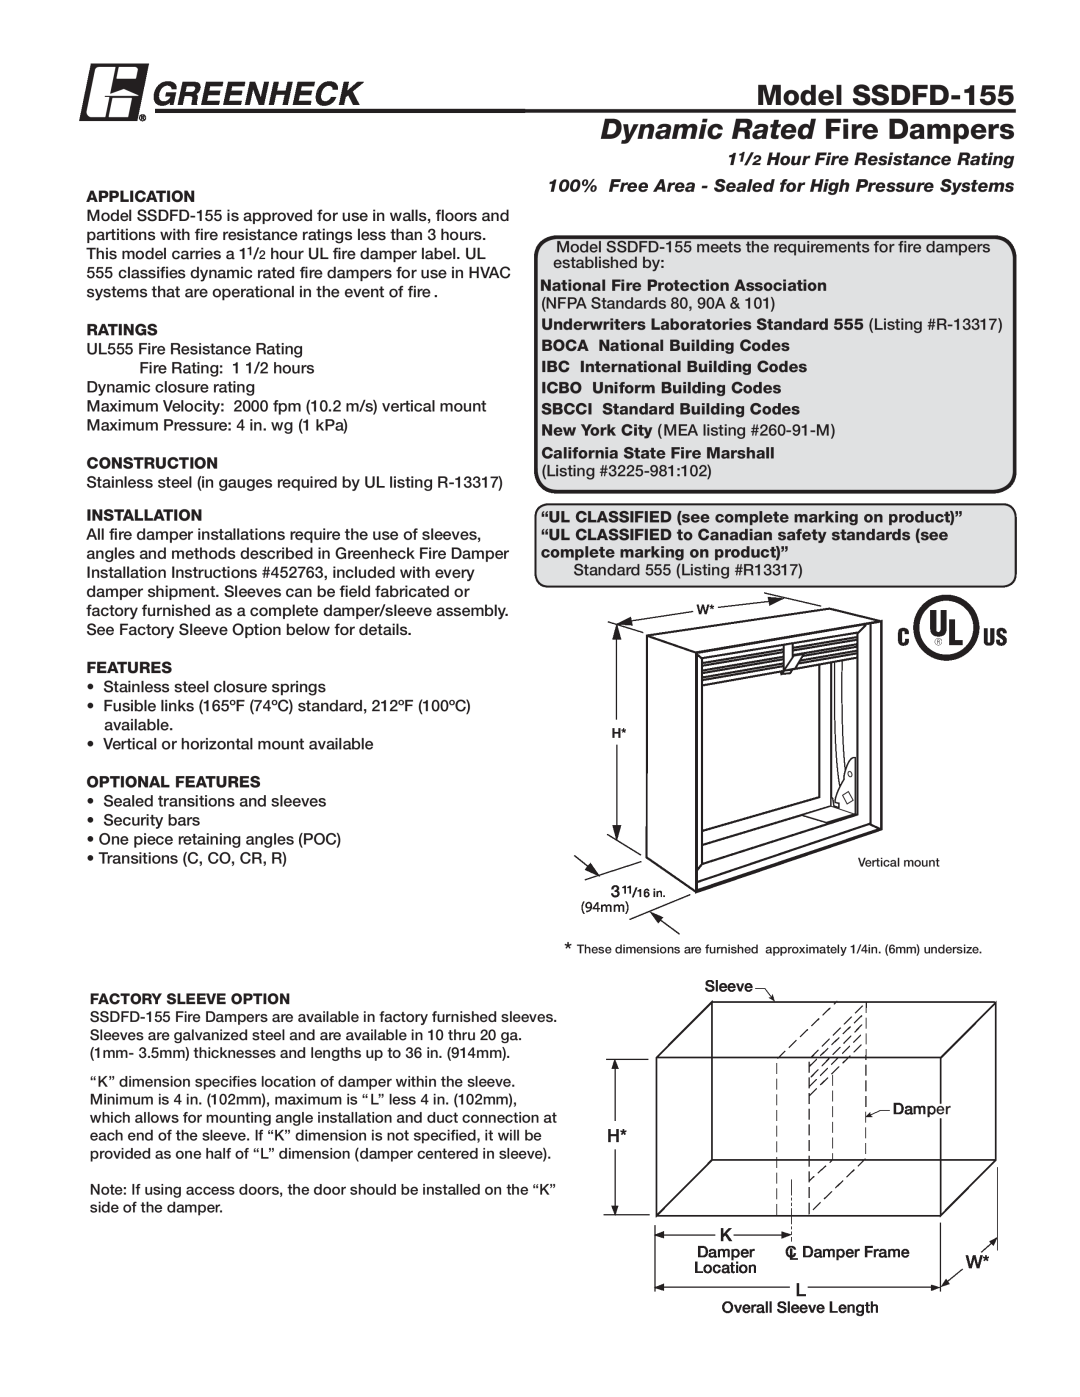 Greenheck Fan installation instructions Model SSDFD-155, Dynamic Rated Fire Dampers, 11/2 Hour Fire Resistance Rating 